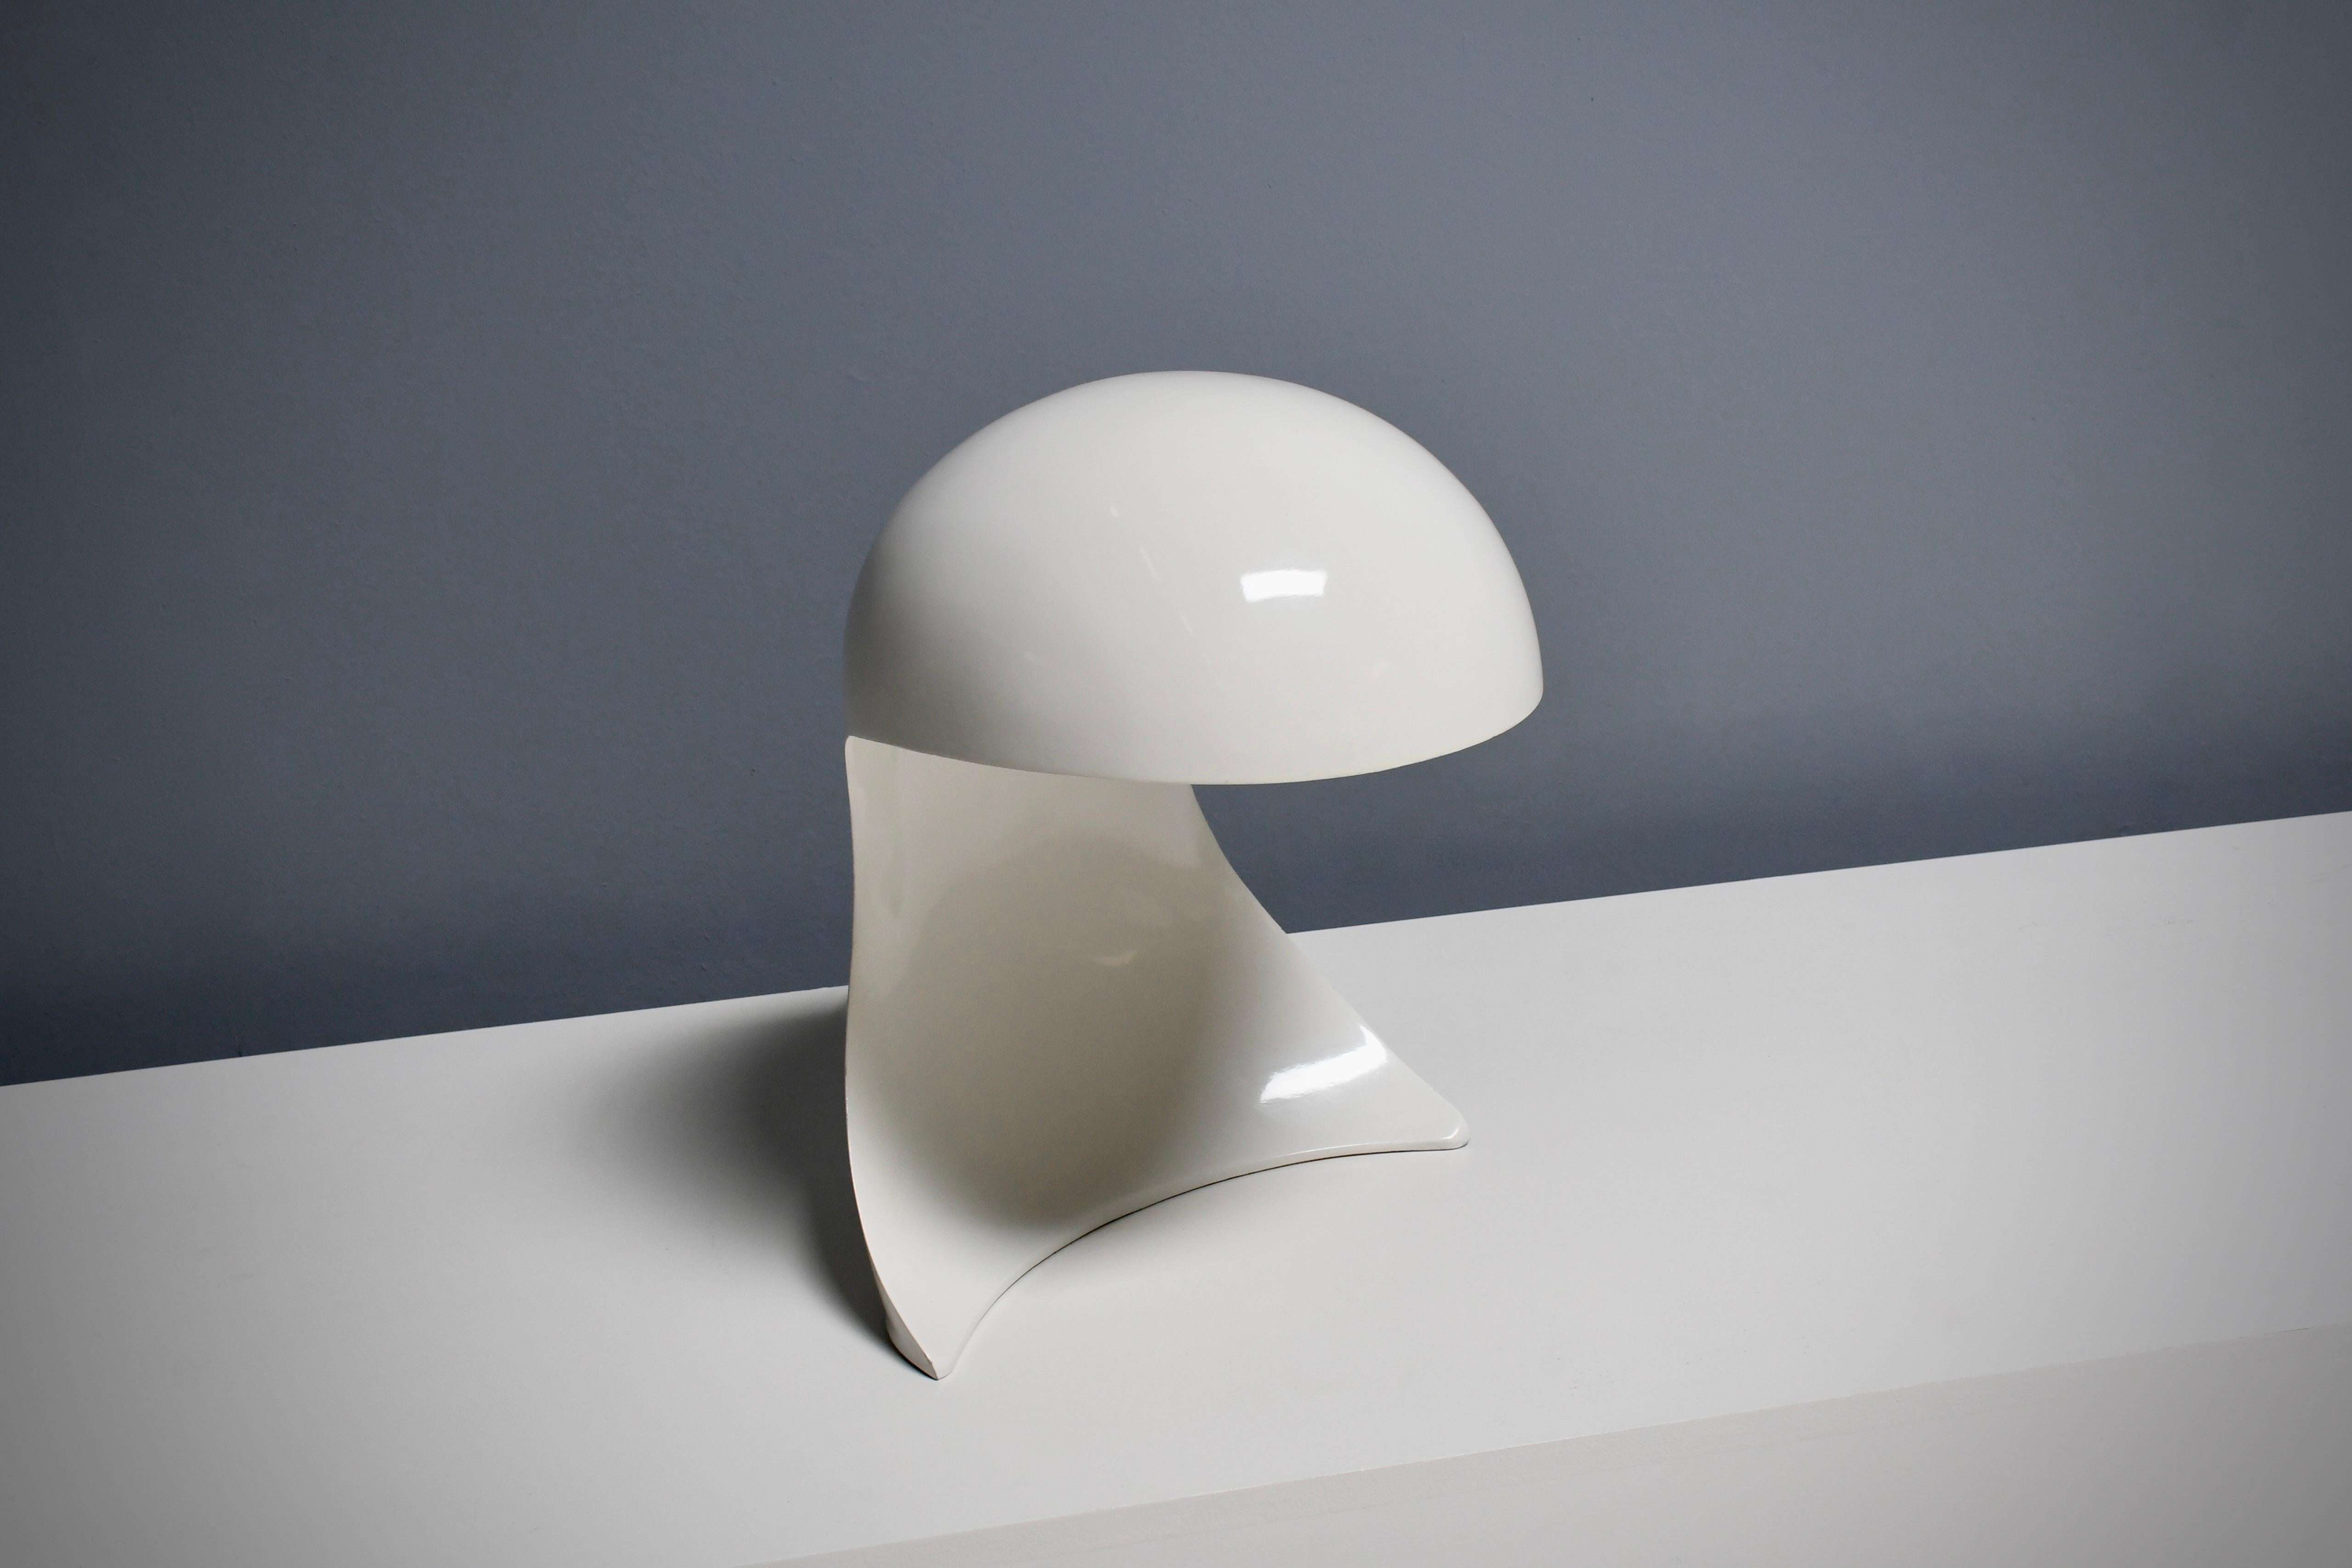 Impressive Dania table lamp in very good condition.

Designed by Dario Tognon and Studio Celli.

Manufactured by Artemide, After the introduction in 1969 Artemide produced the lamp only for a few years.

The sculptural and organic shape of the Dania